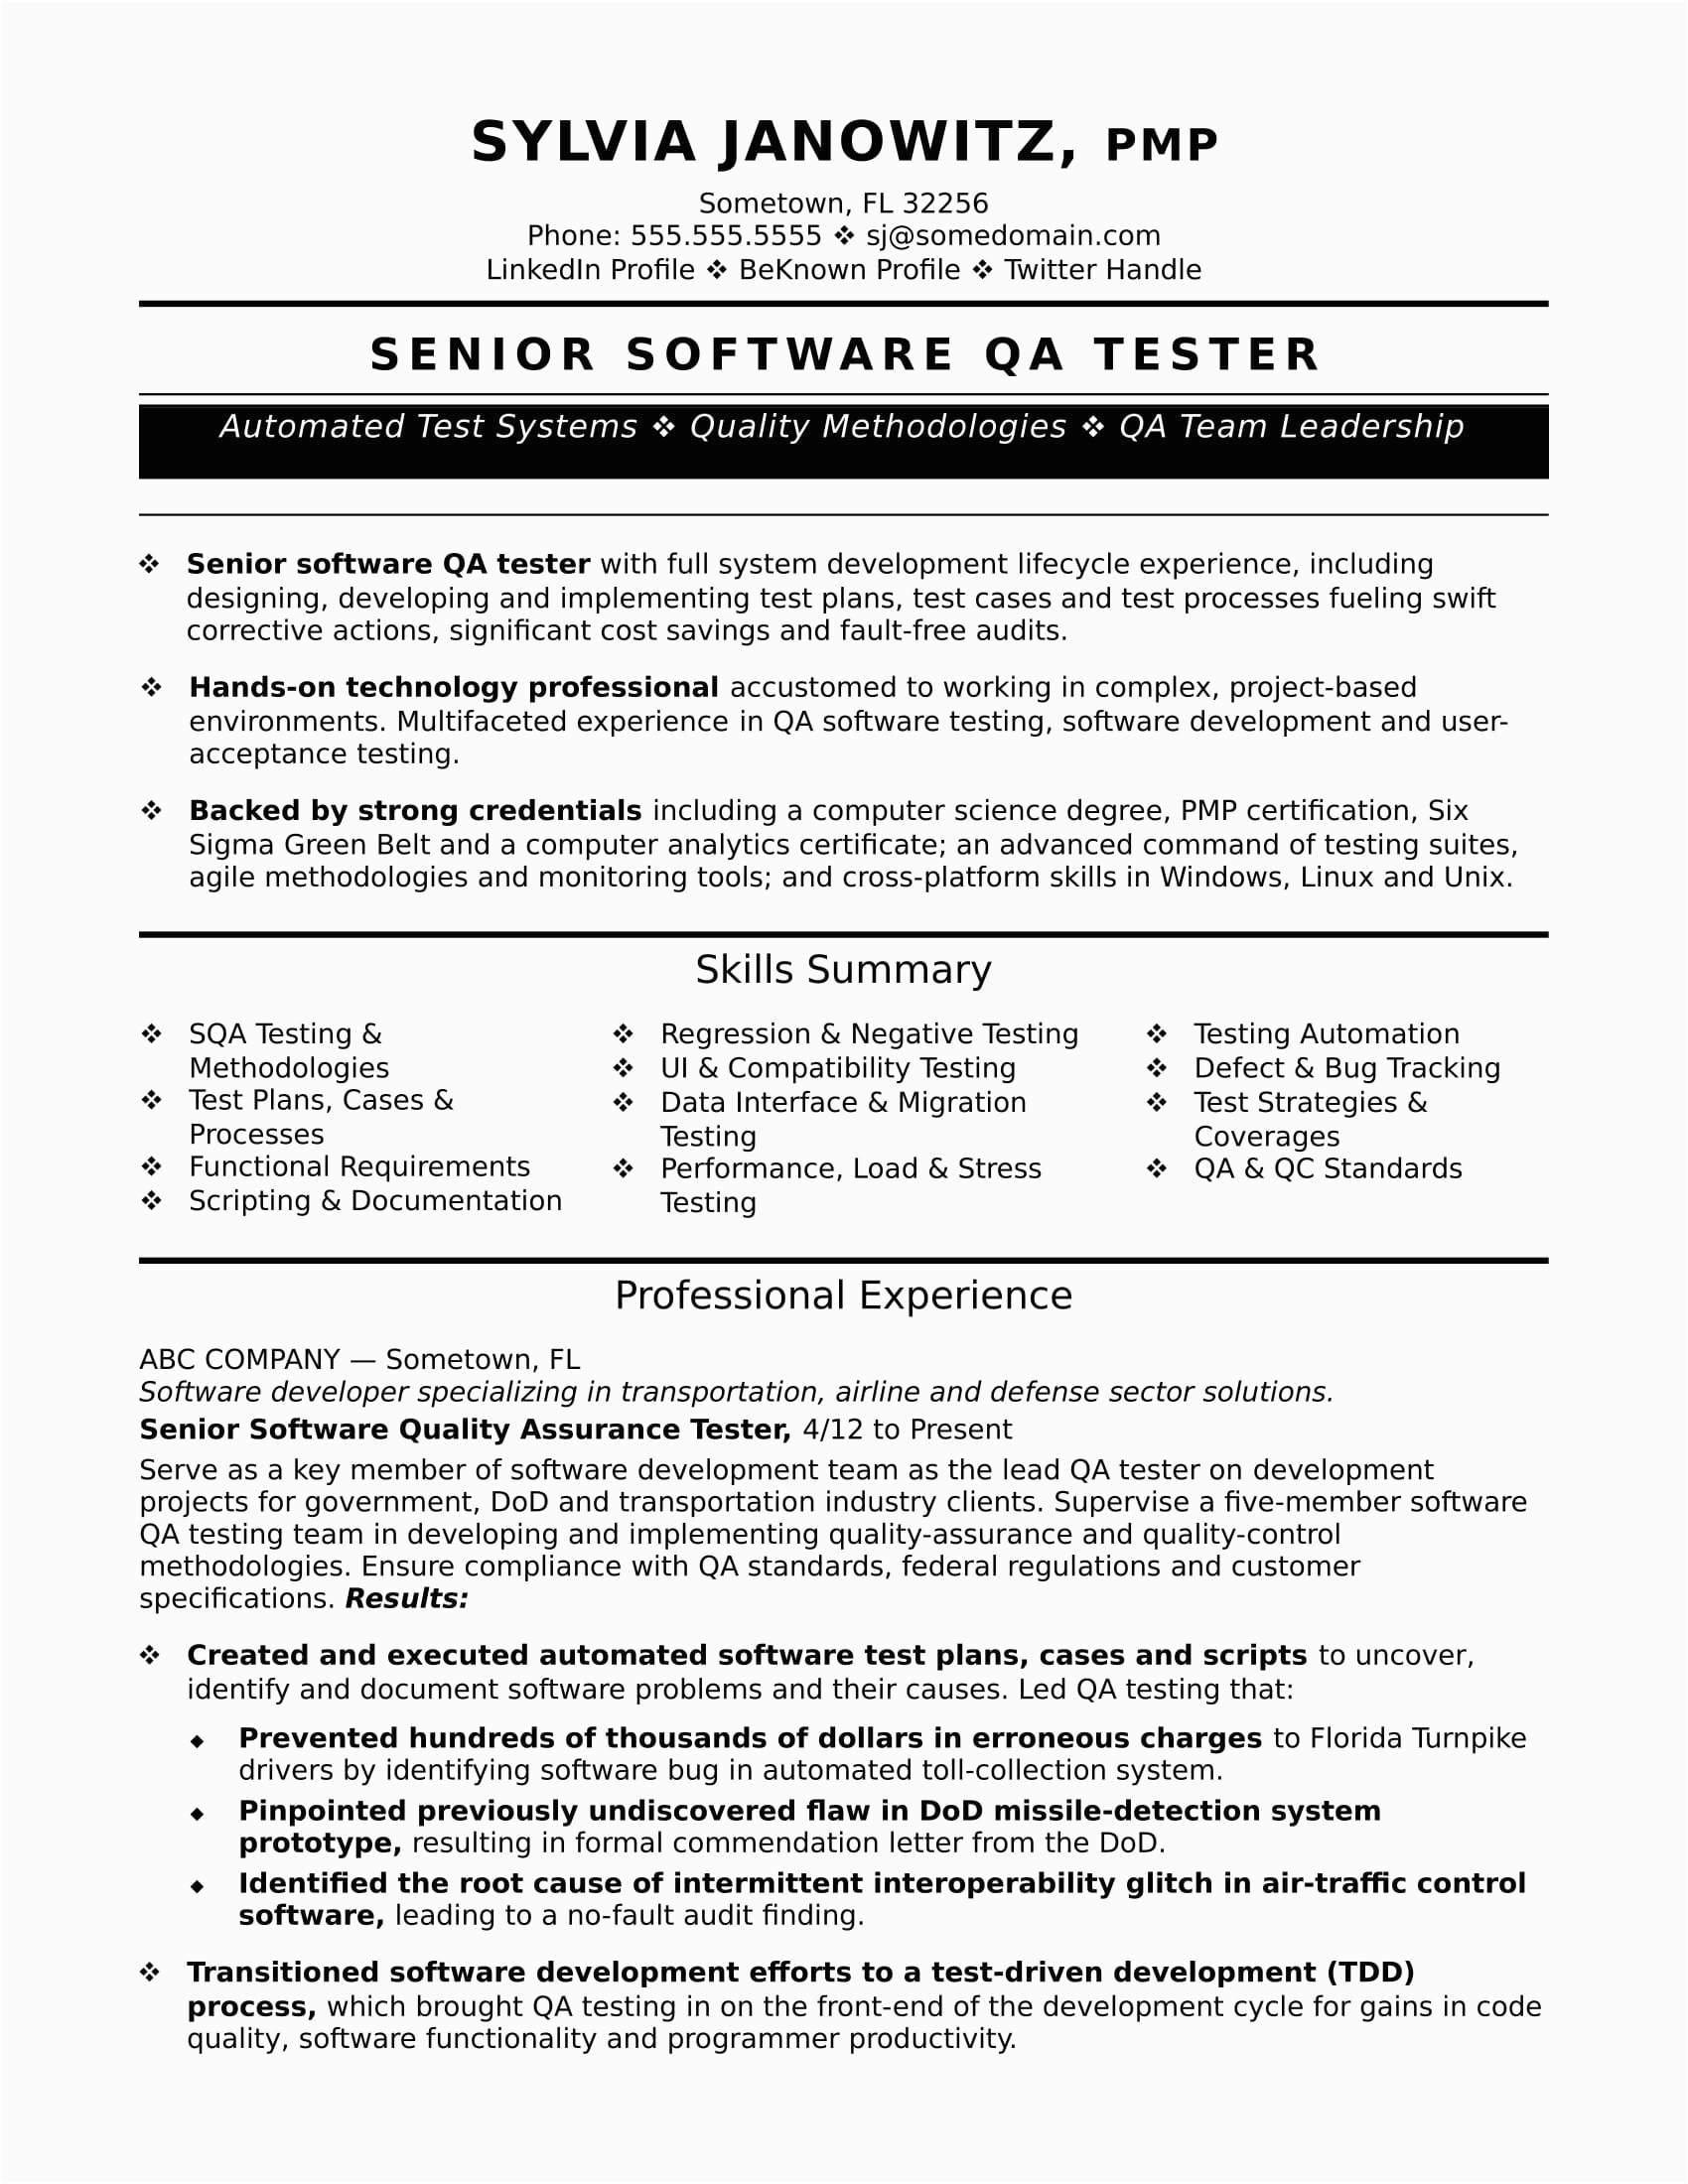 Sample Qa Test Lead Resume In Usa format Experienced Qa software Tester Resume Sample